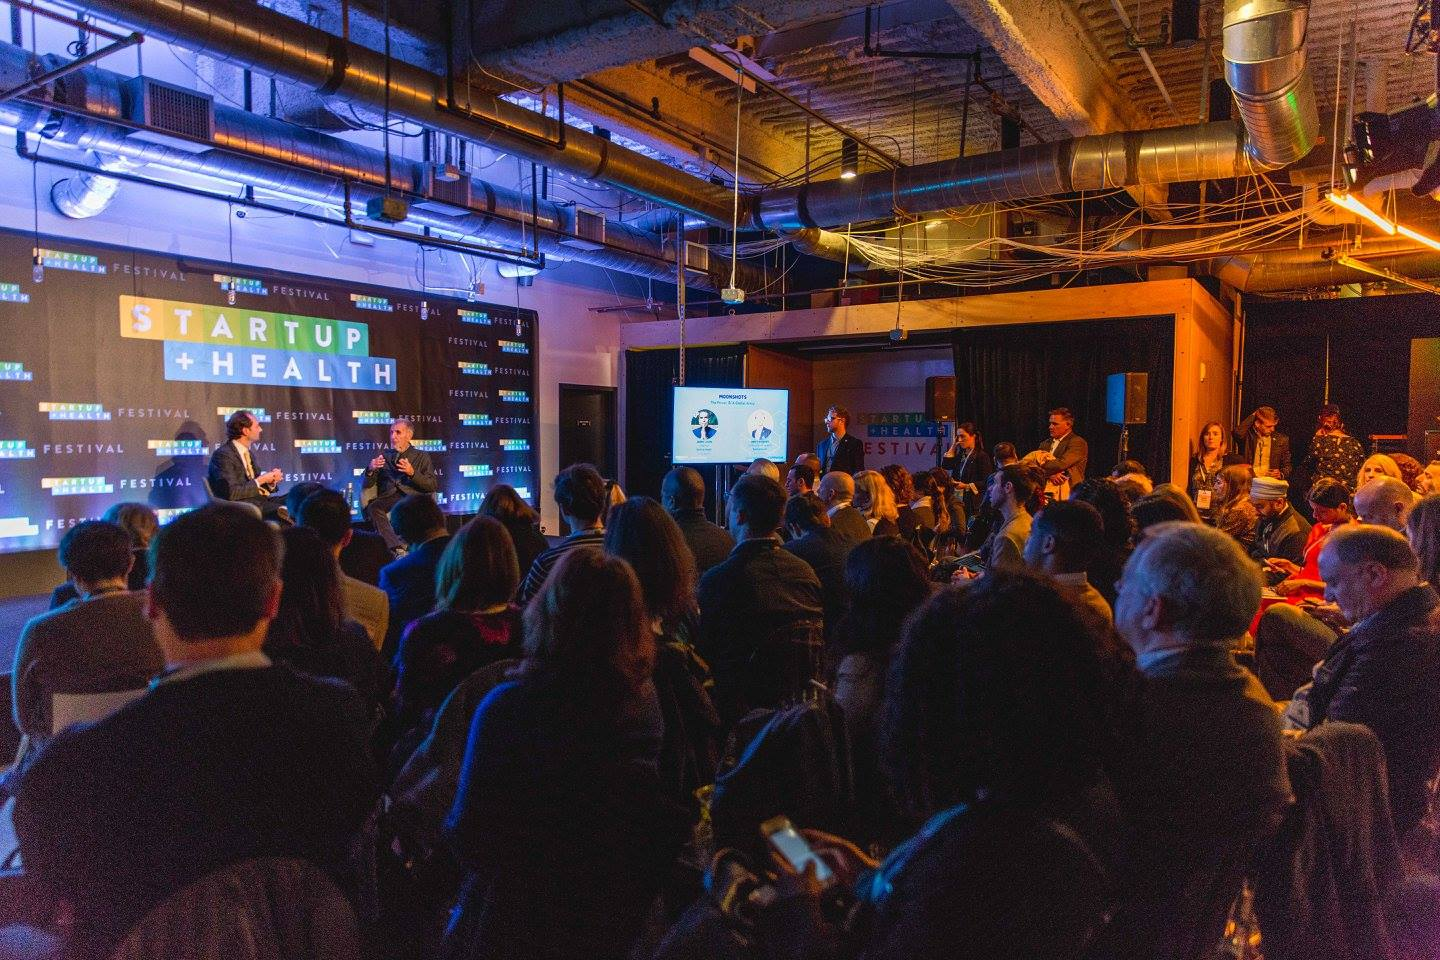 StartUp Health Broadcasts Annual Festival with Wirecast